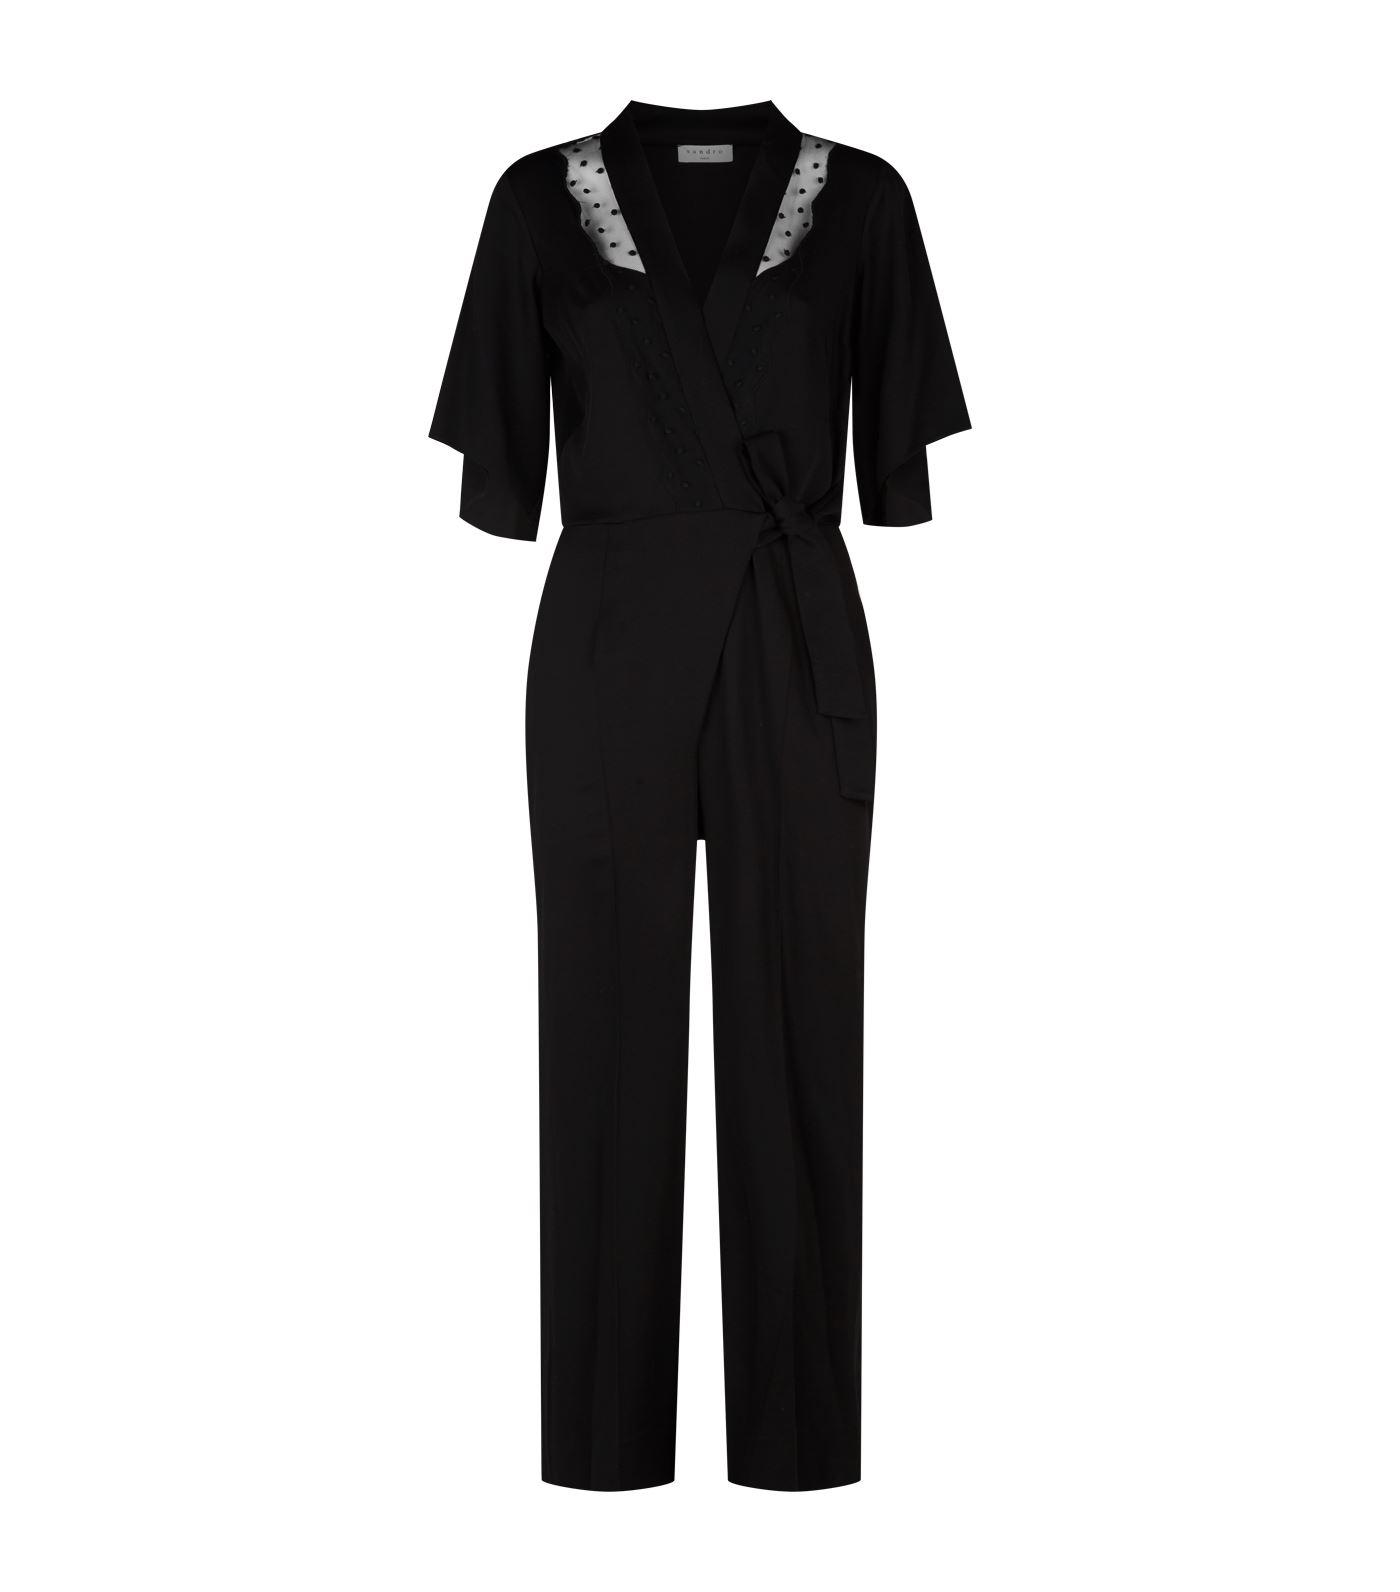 Sandro Wrap Front Jumpsuit in Black - Lyst